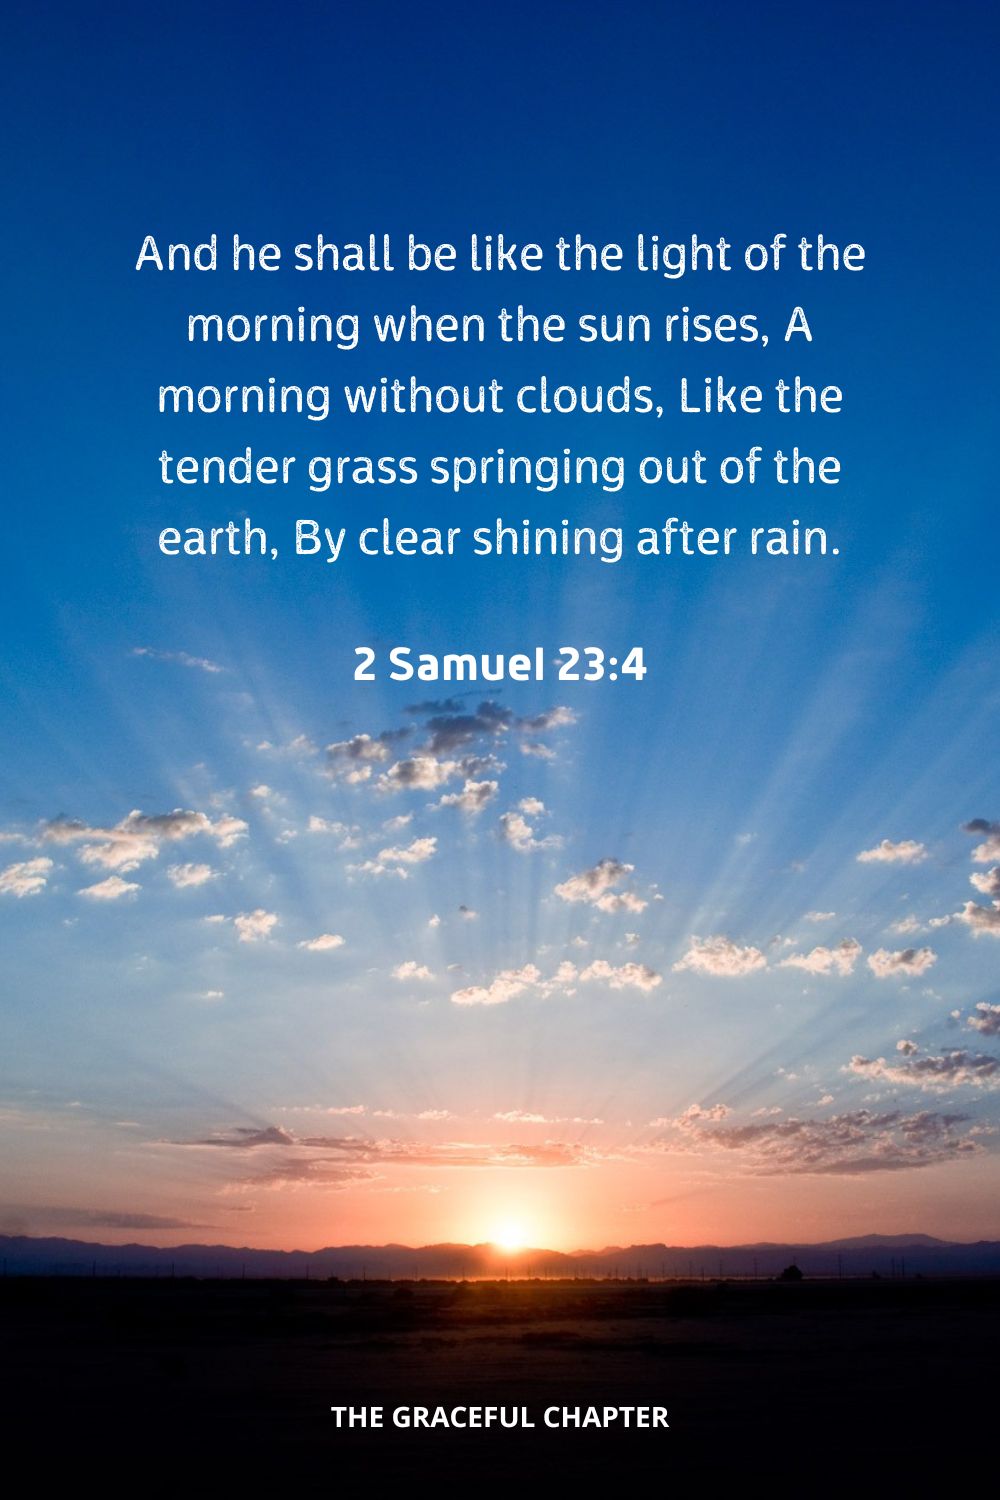 And he shall be like the light of the morning when the sun rises, A morning without clouds, Like the tender grass springing out of the earth, By clear shining after rain.’